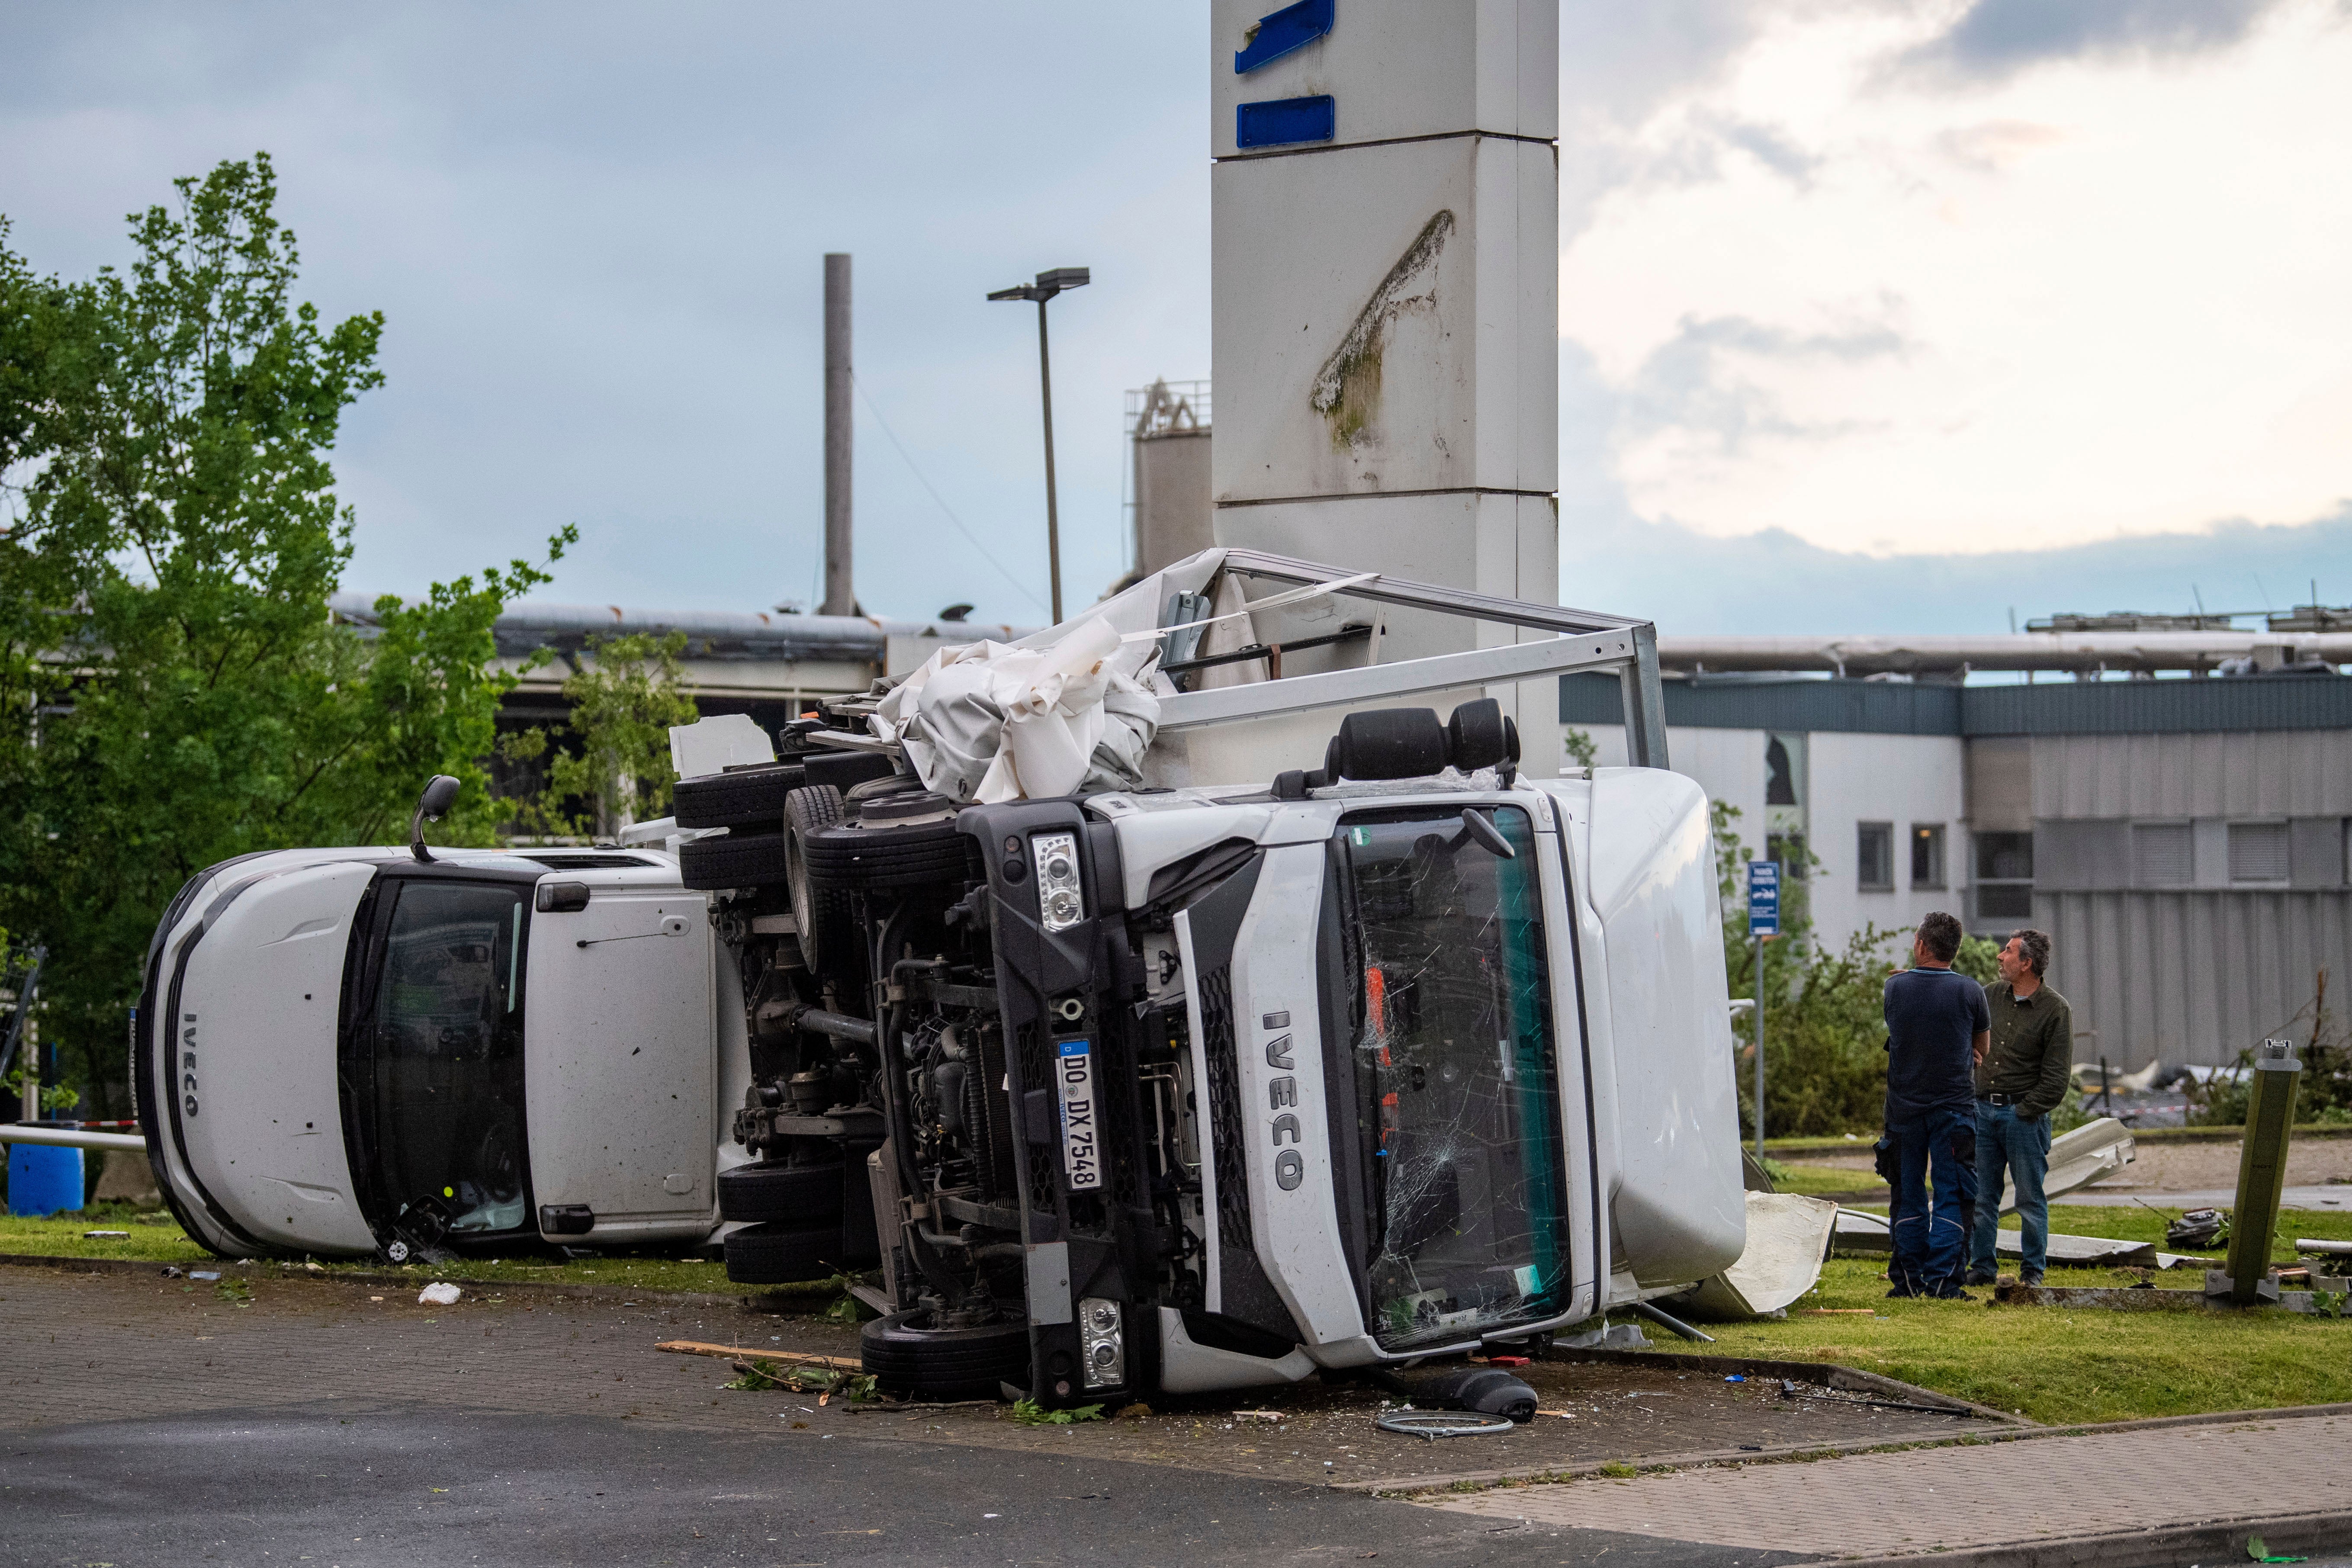 Two trucks were overturned in Paderborn after high winds hit western Germany